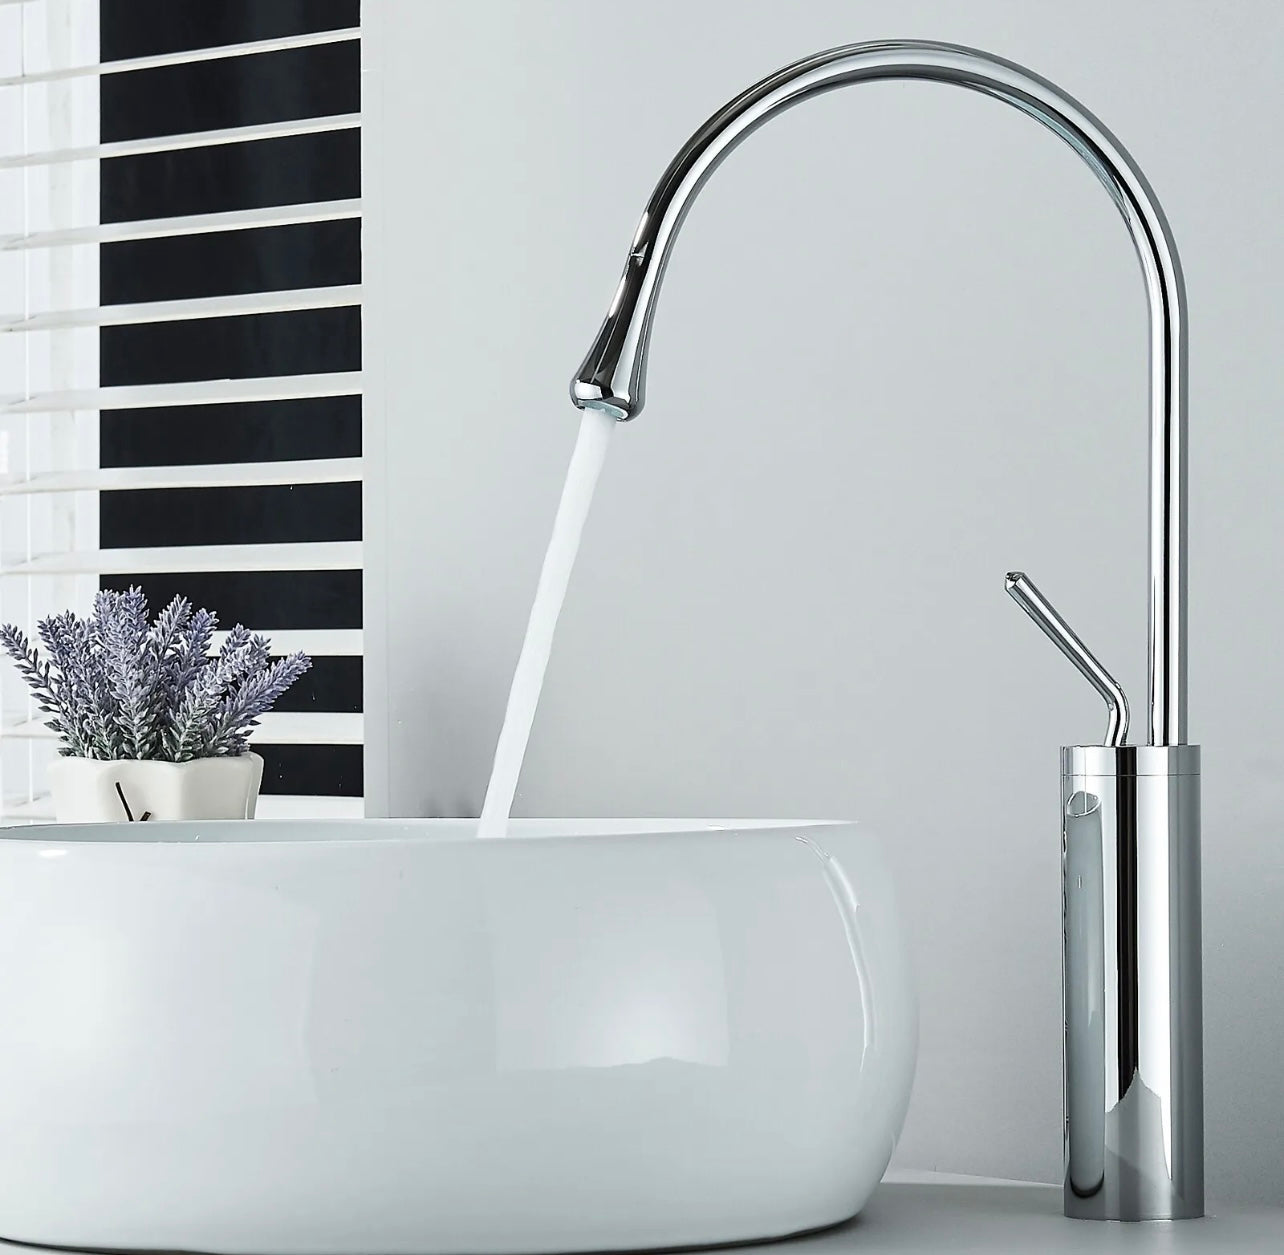 Chrome waterfall goose neck vessel faucet